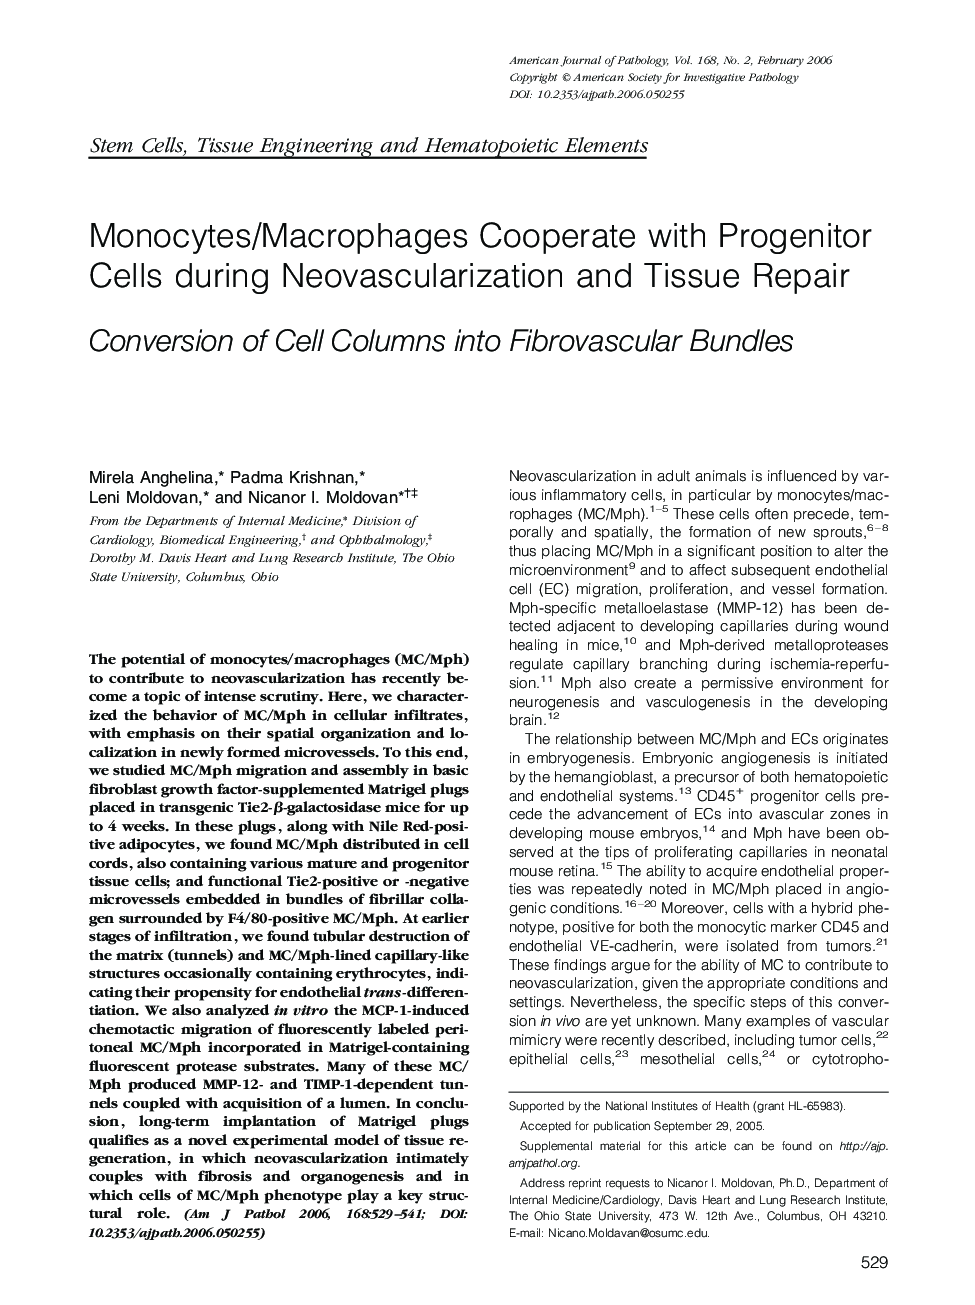 Regular ArticlesMonocytes/Macrophages Cooperate with Progenitor Cells during Neovascularization and Tissue Repair: Conversion of Cell Columns into Fibrovascular Bundles